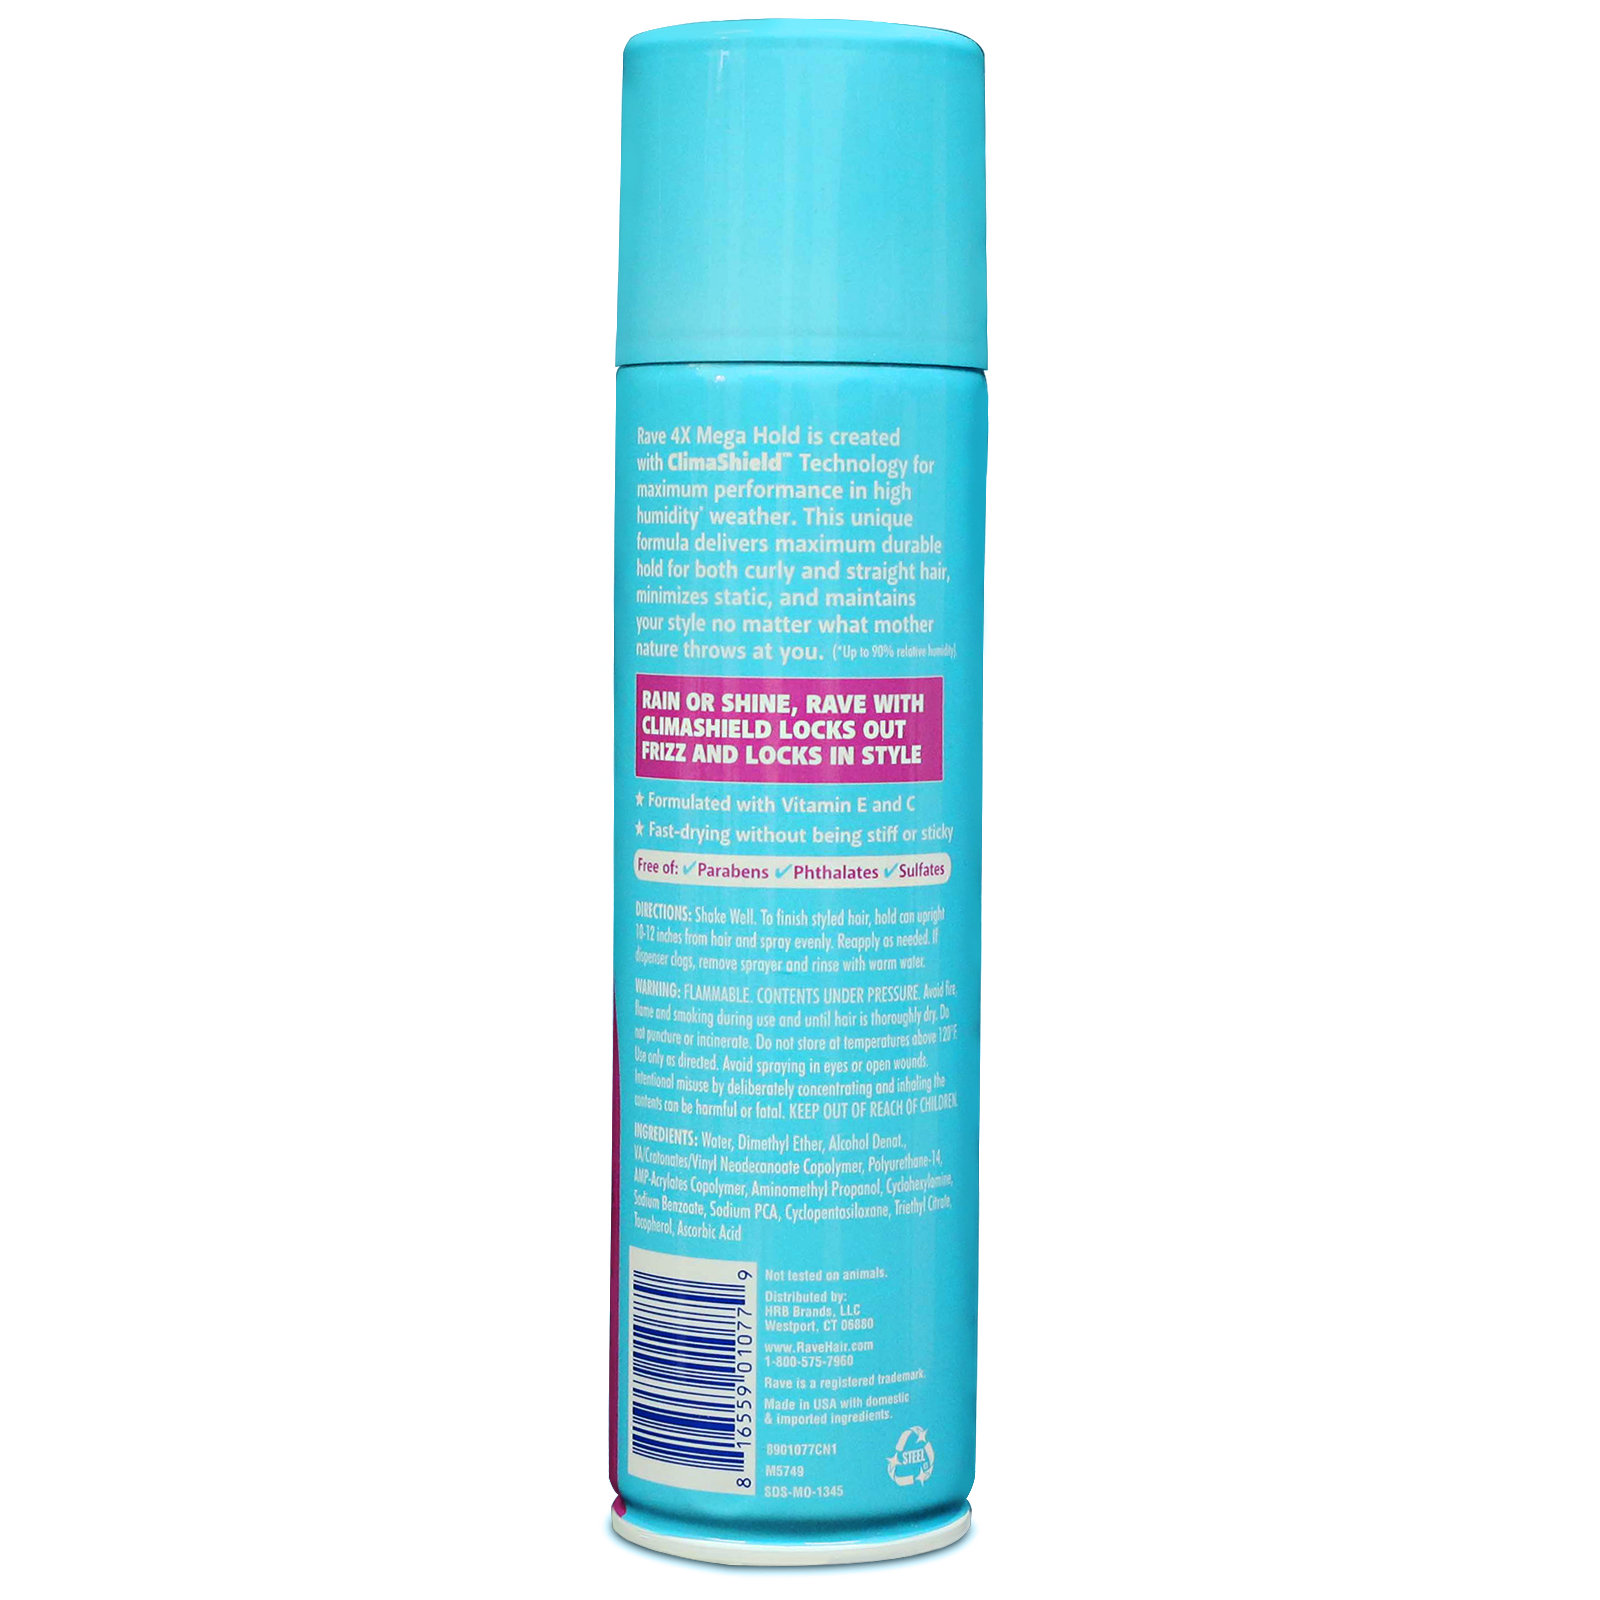 Rave 4X Mega Hold Hair Spray, All-Weather Protection with Vitamin-Rich Formula, 11 oz - image 2 of 8